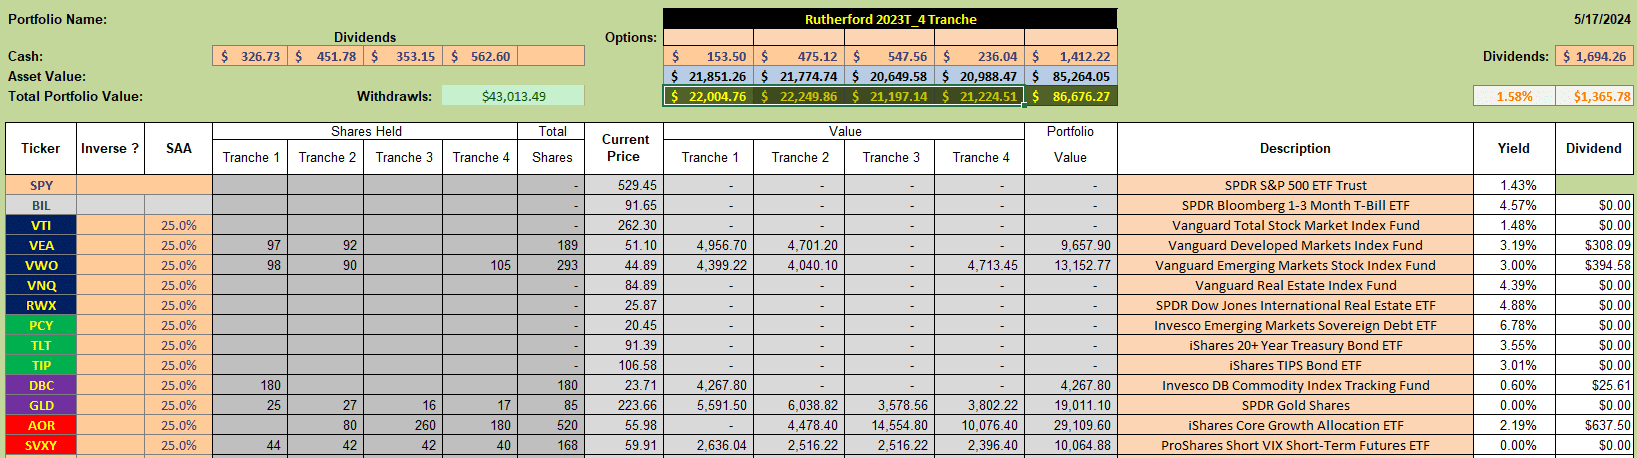 Rutherford Portfolio Review (Tranche 3): 17 May 2024 4